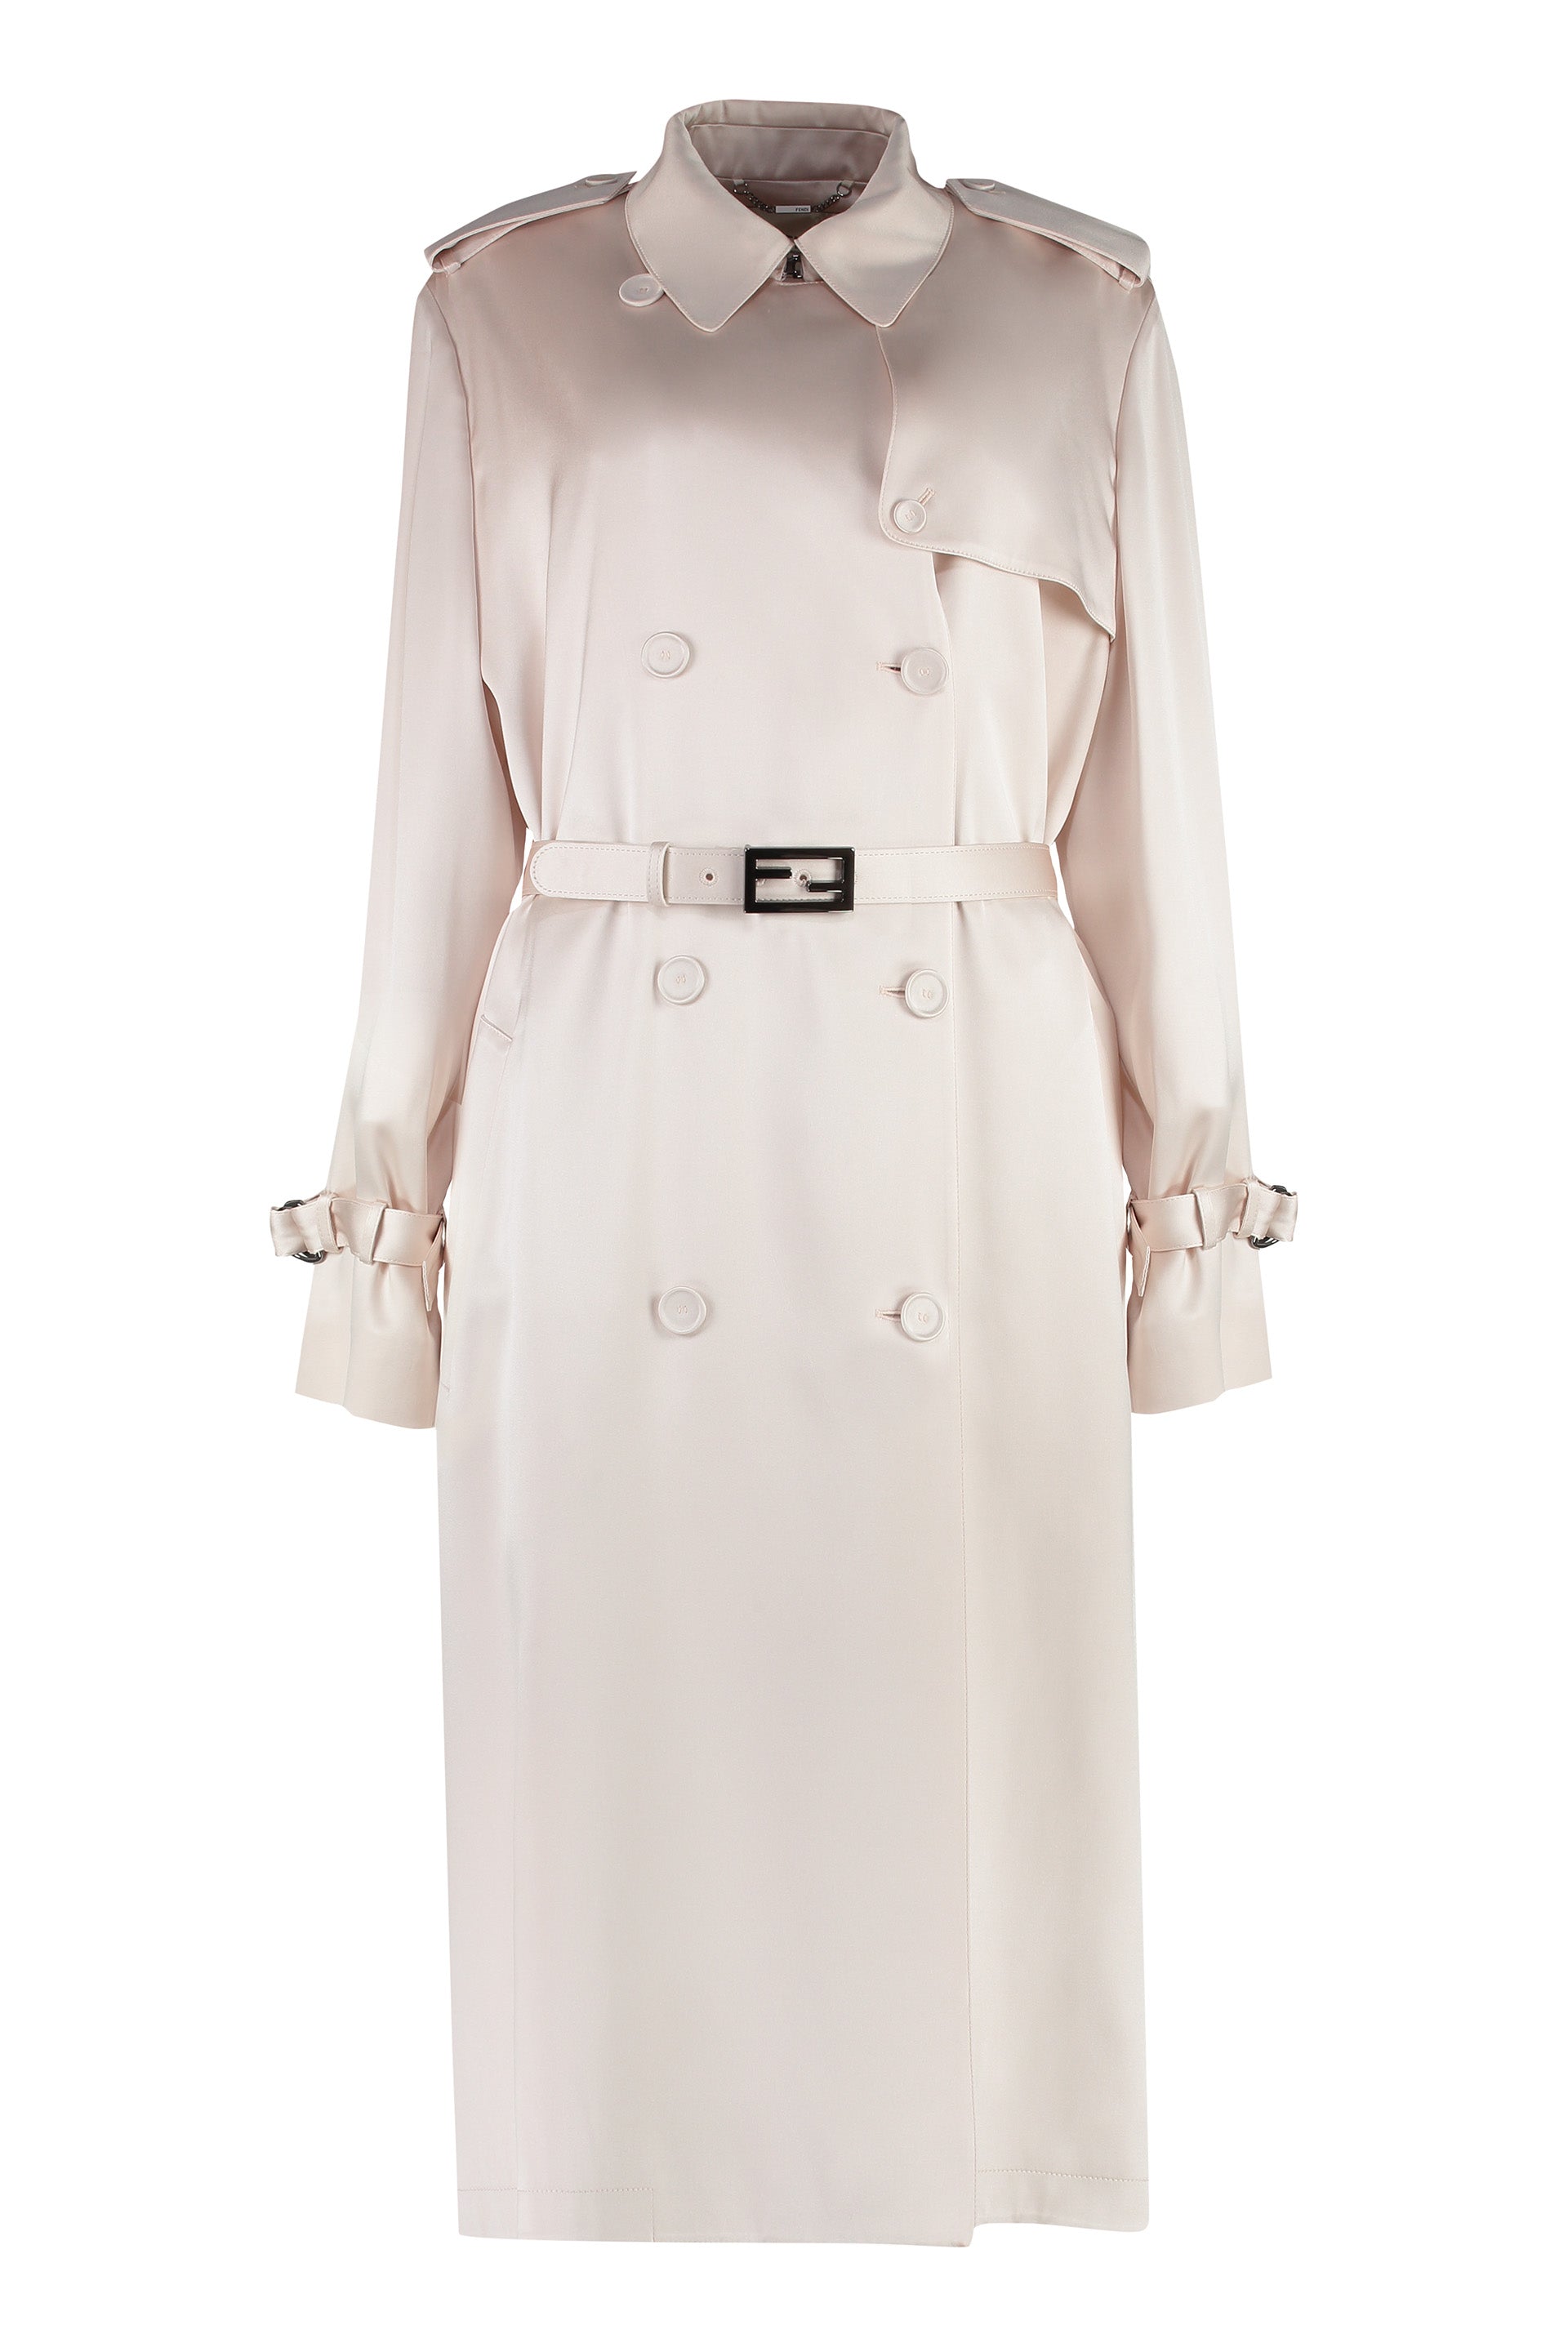 Fendi Beige Trench Jacket With Lapel Collar And Strap Detail